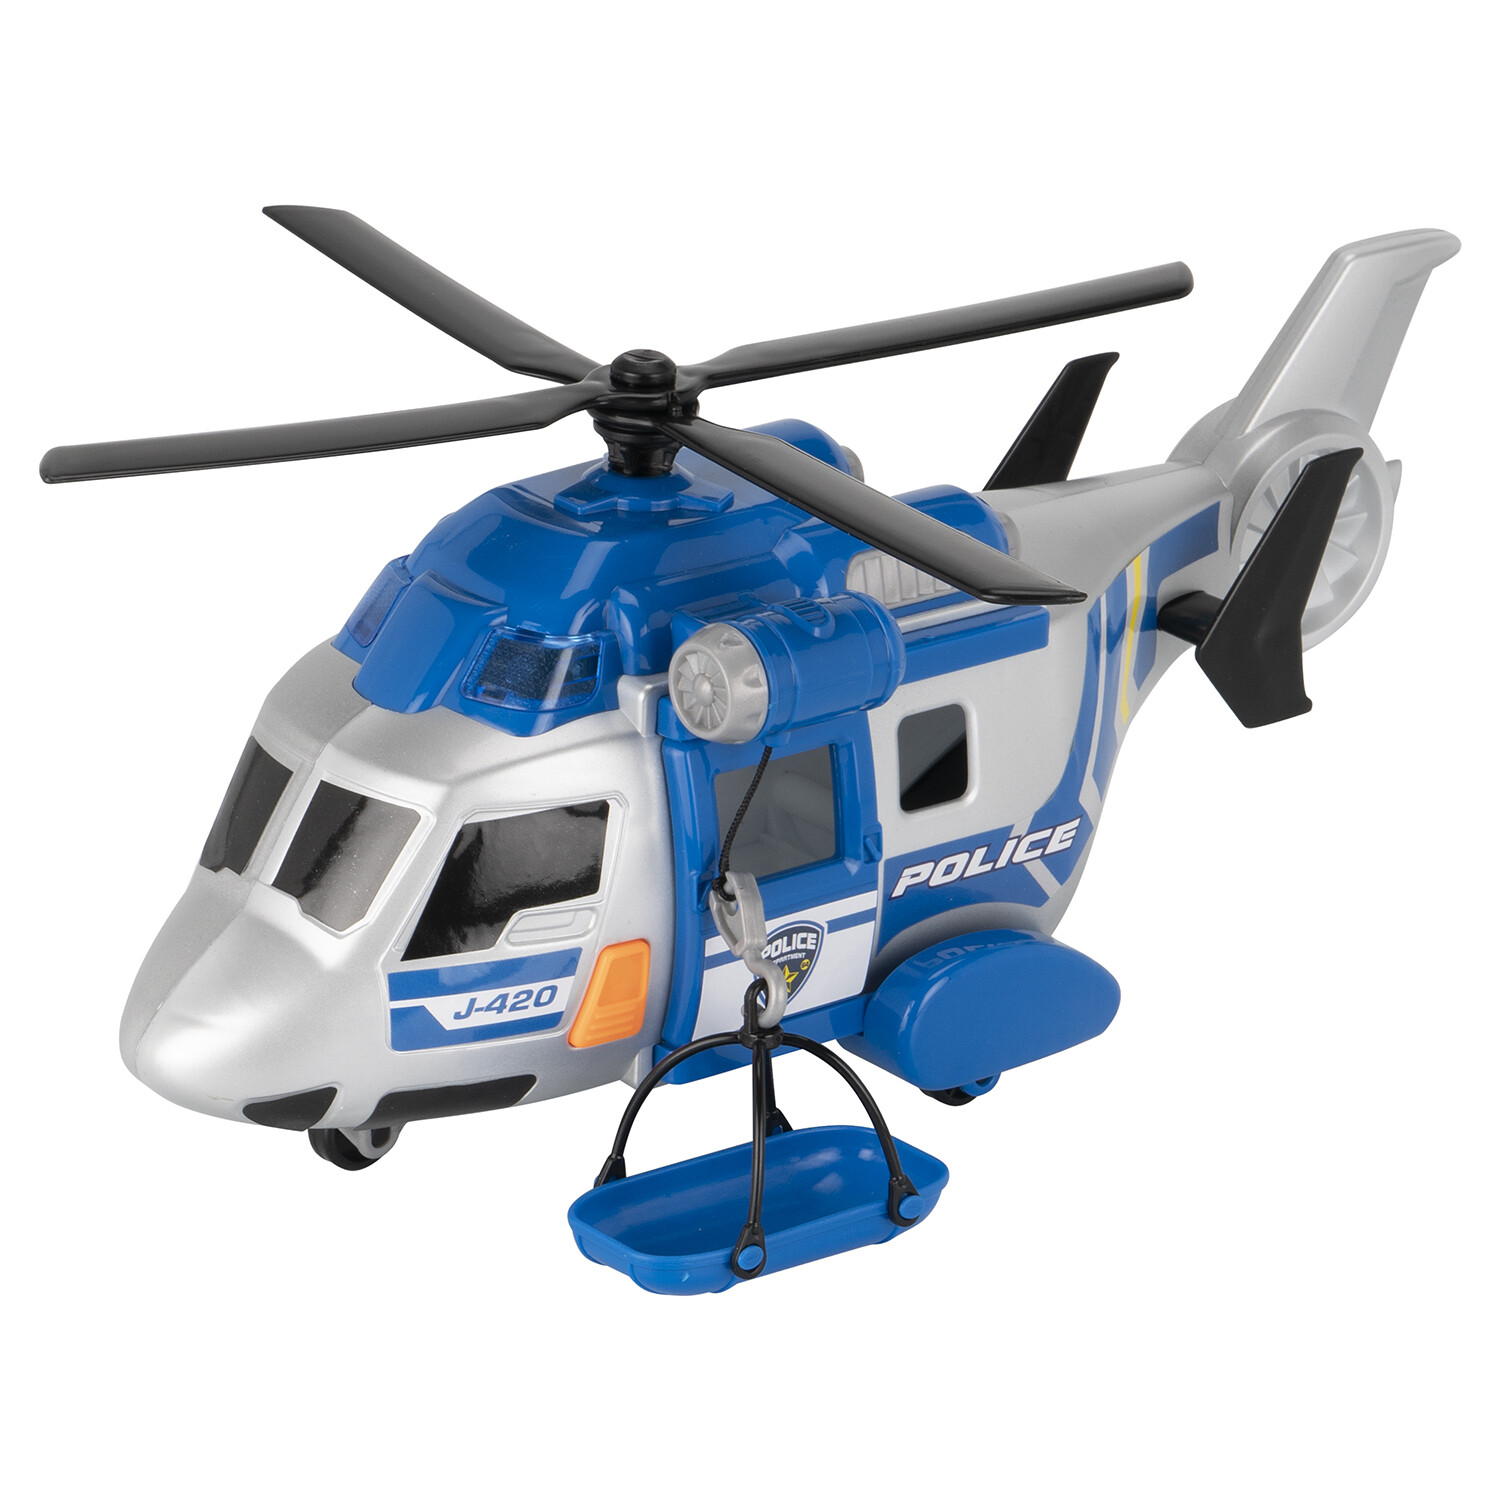 Teamsterz Light and Sound Police Rescue Helicopter Toy Image 2